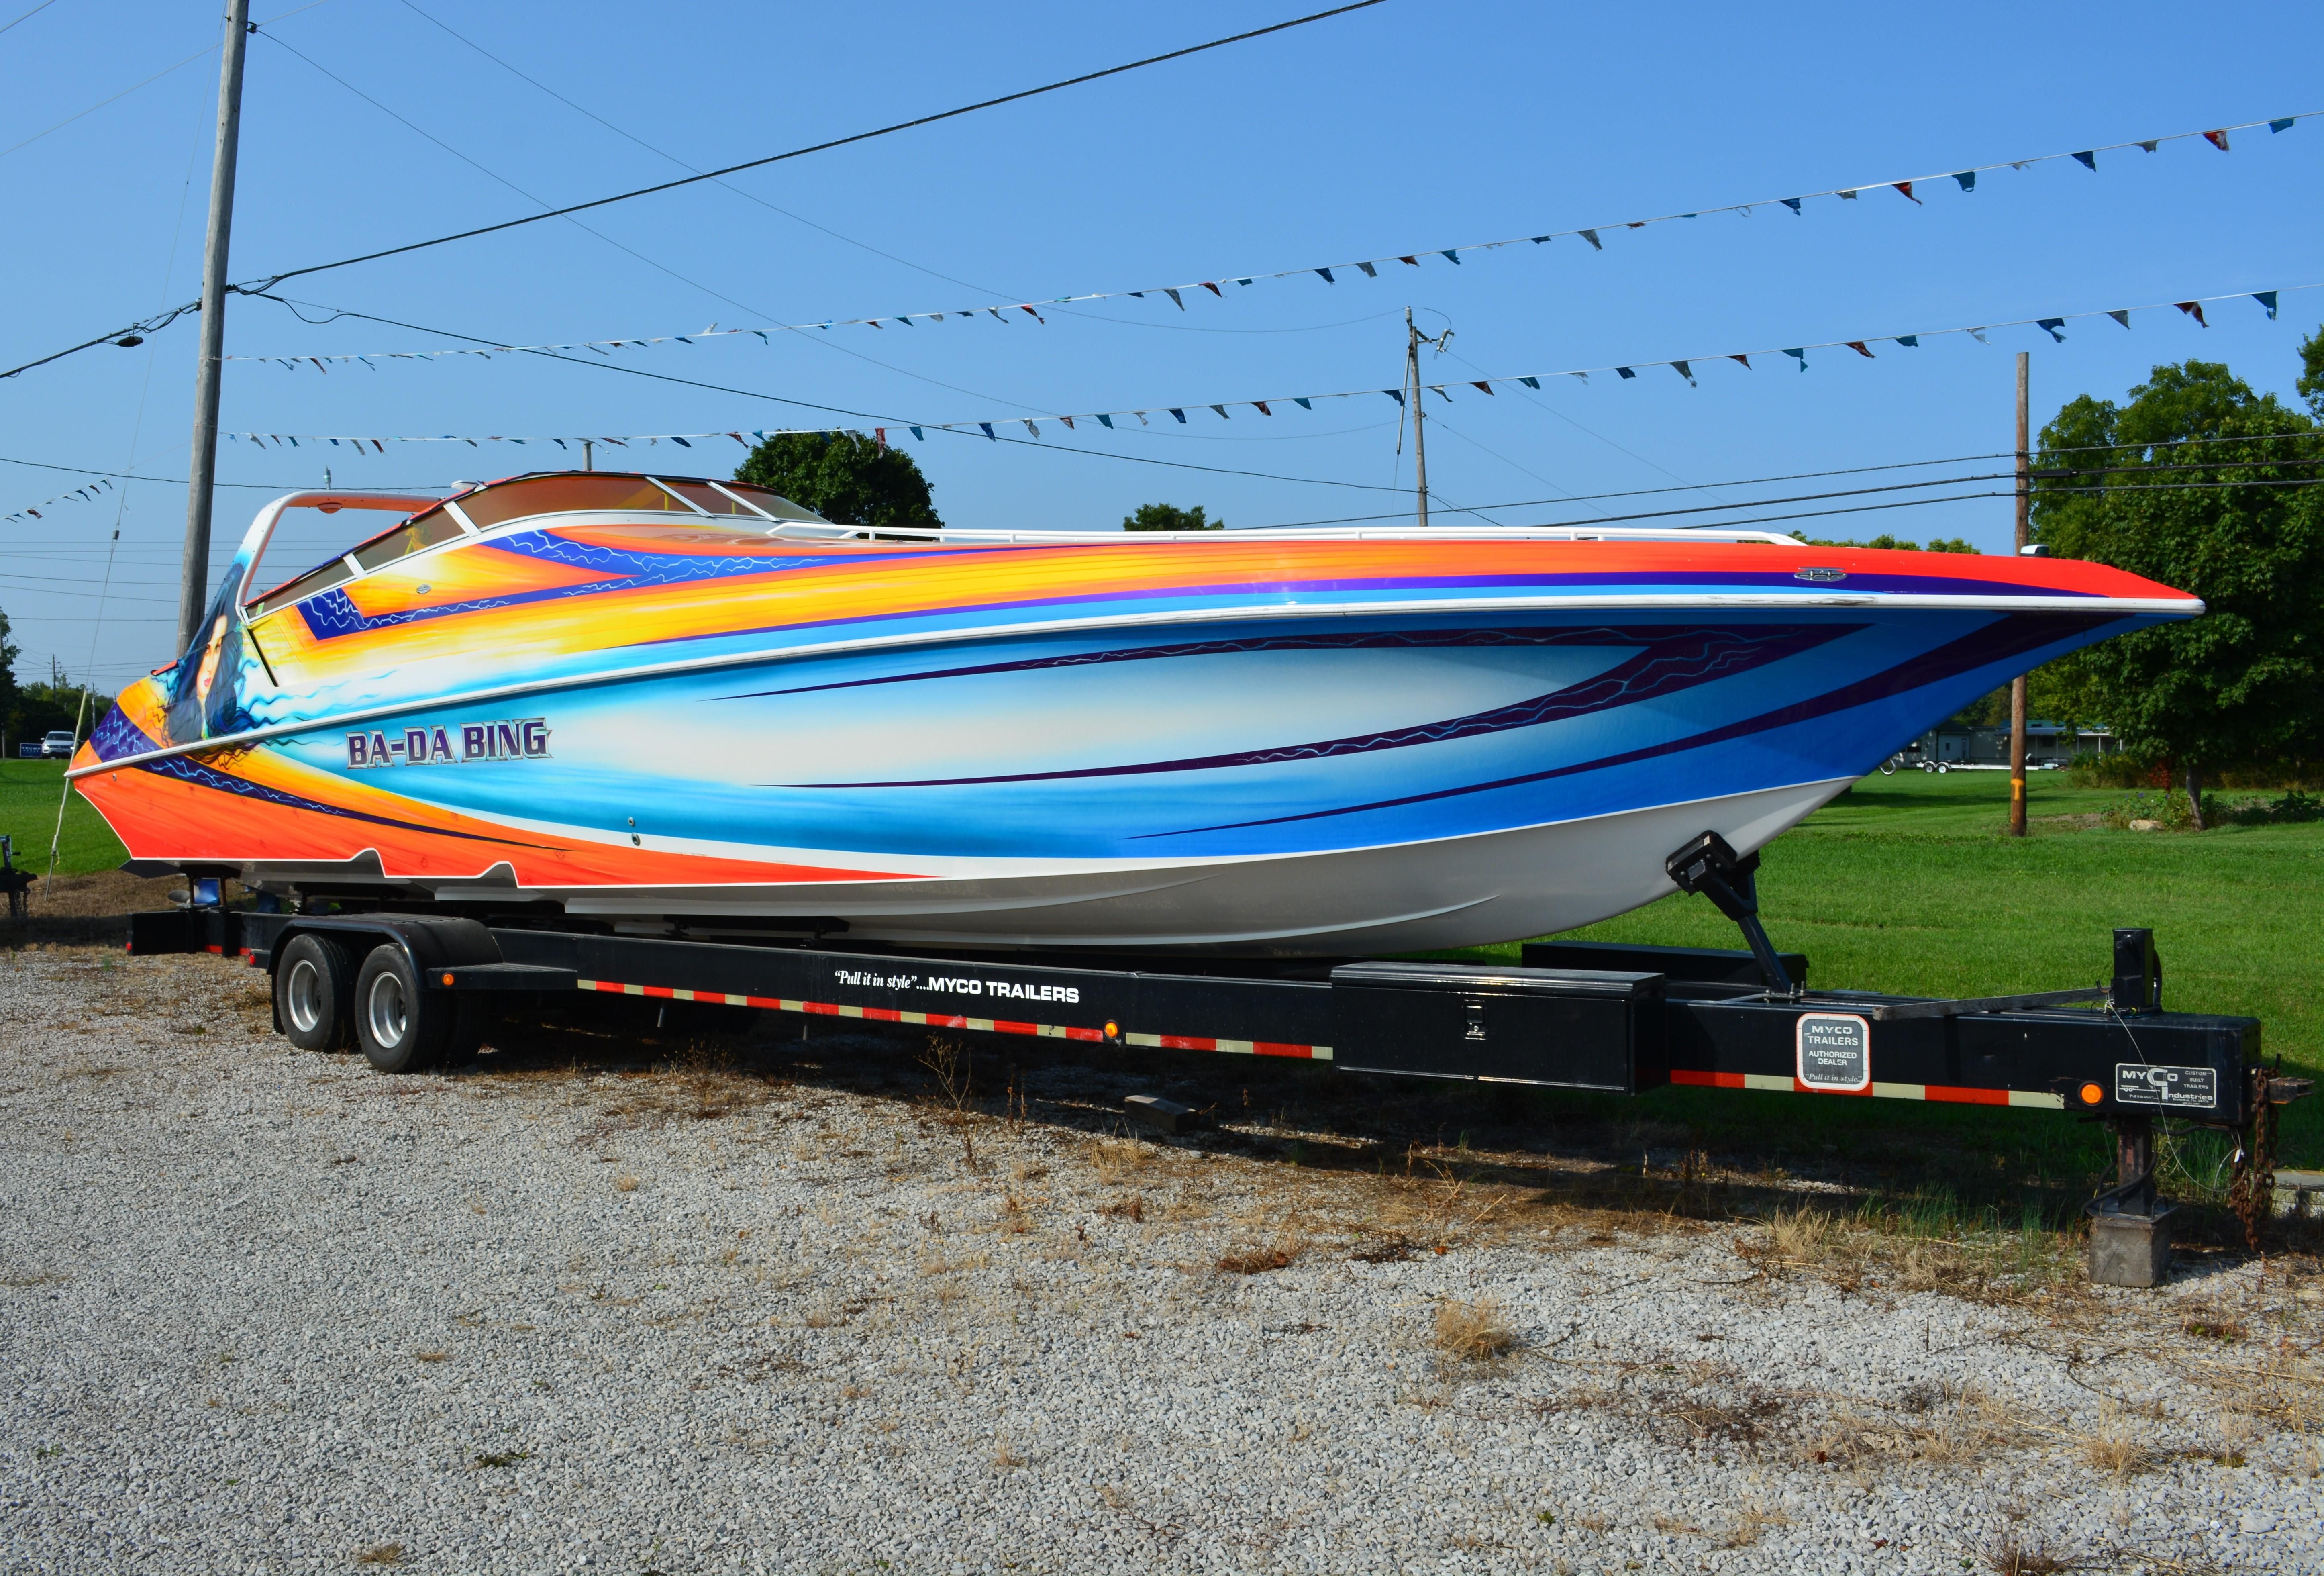 fountain powerboats for sale by owner